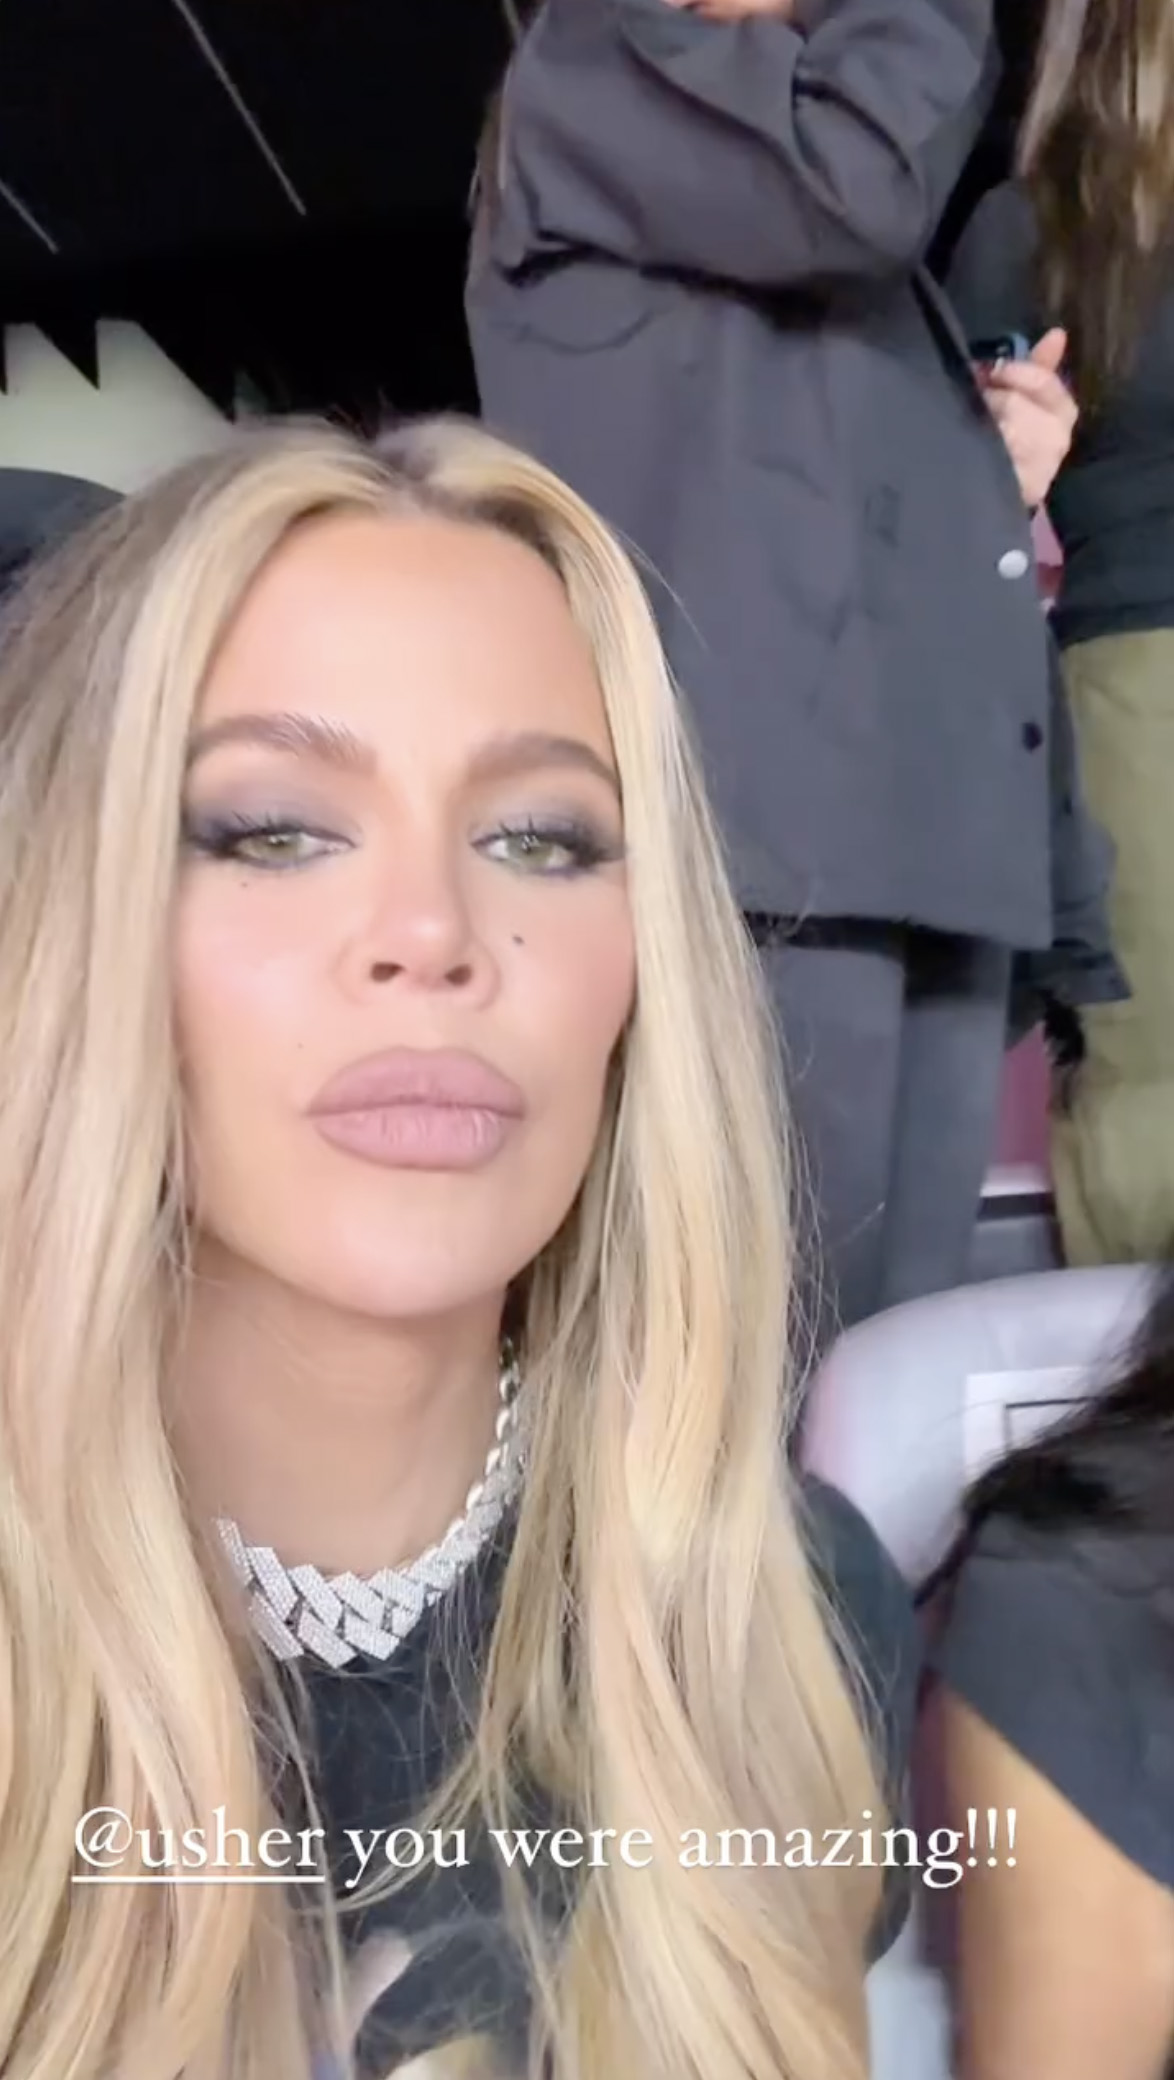 Khloe showed off her long blondish hair and her puffy lips at the camera